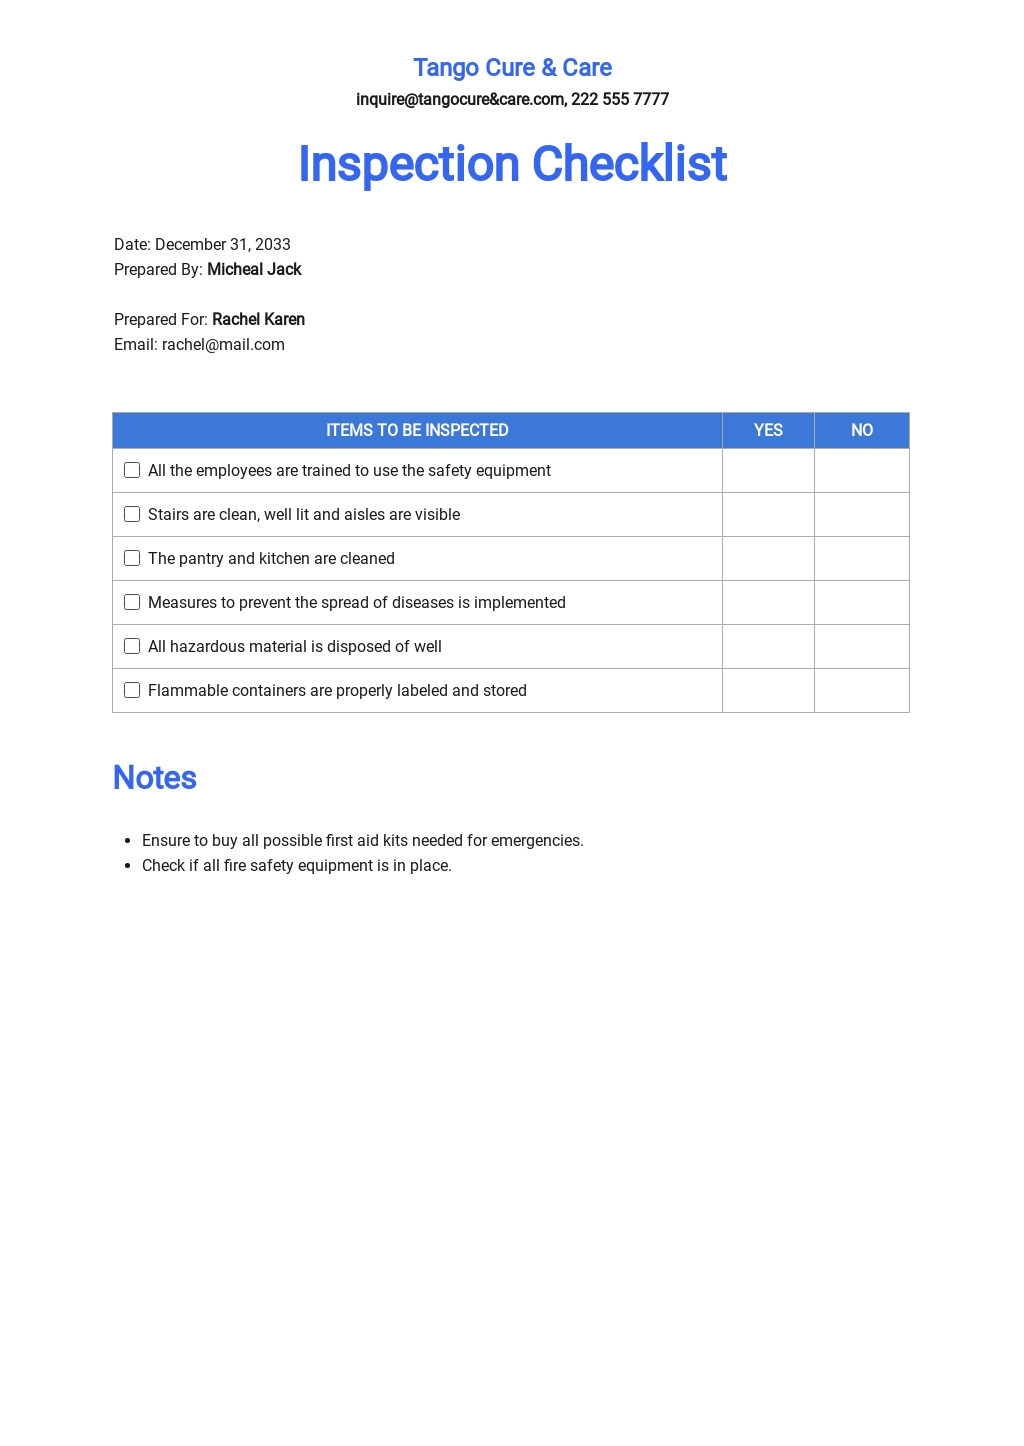 Vehicle Safety Inspection Checklist Template in Google Docs, Word ...